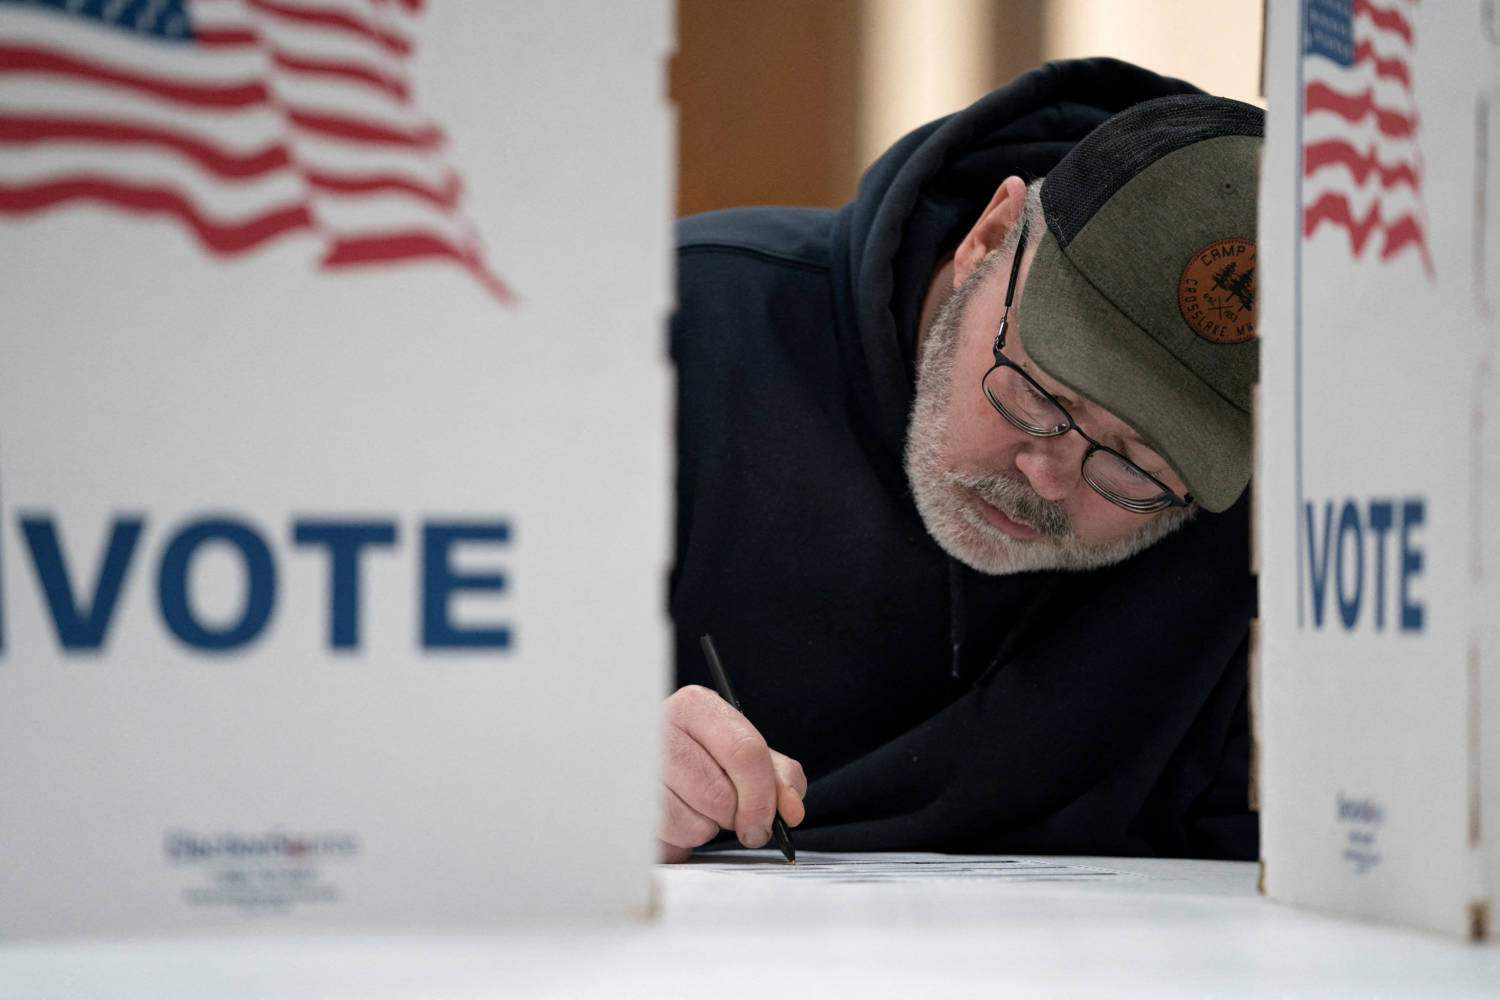 Voters Head To Polling Stations To Vote In The Presidential Primary Election In Wisconsin